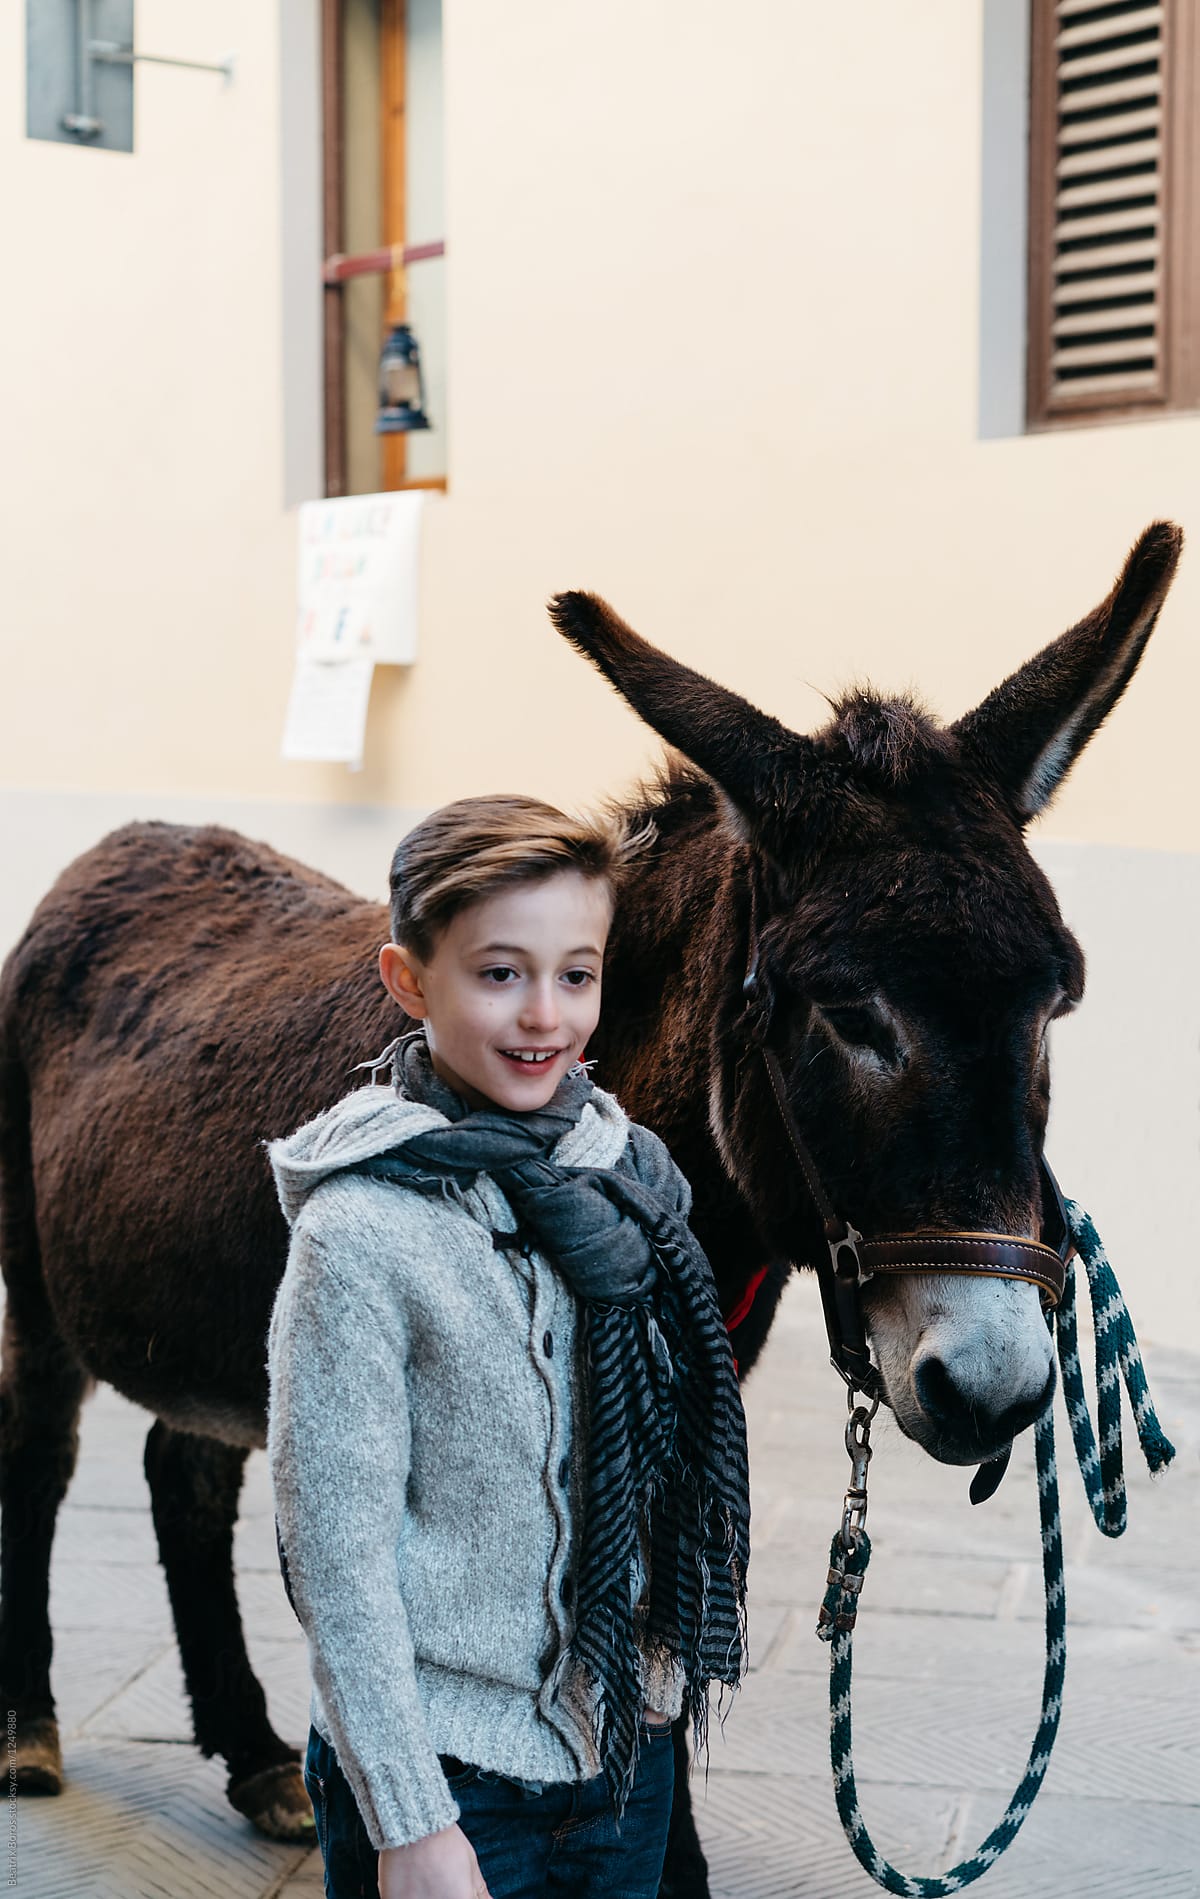 Boy next to a Donkey in the city